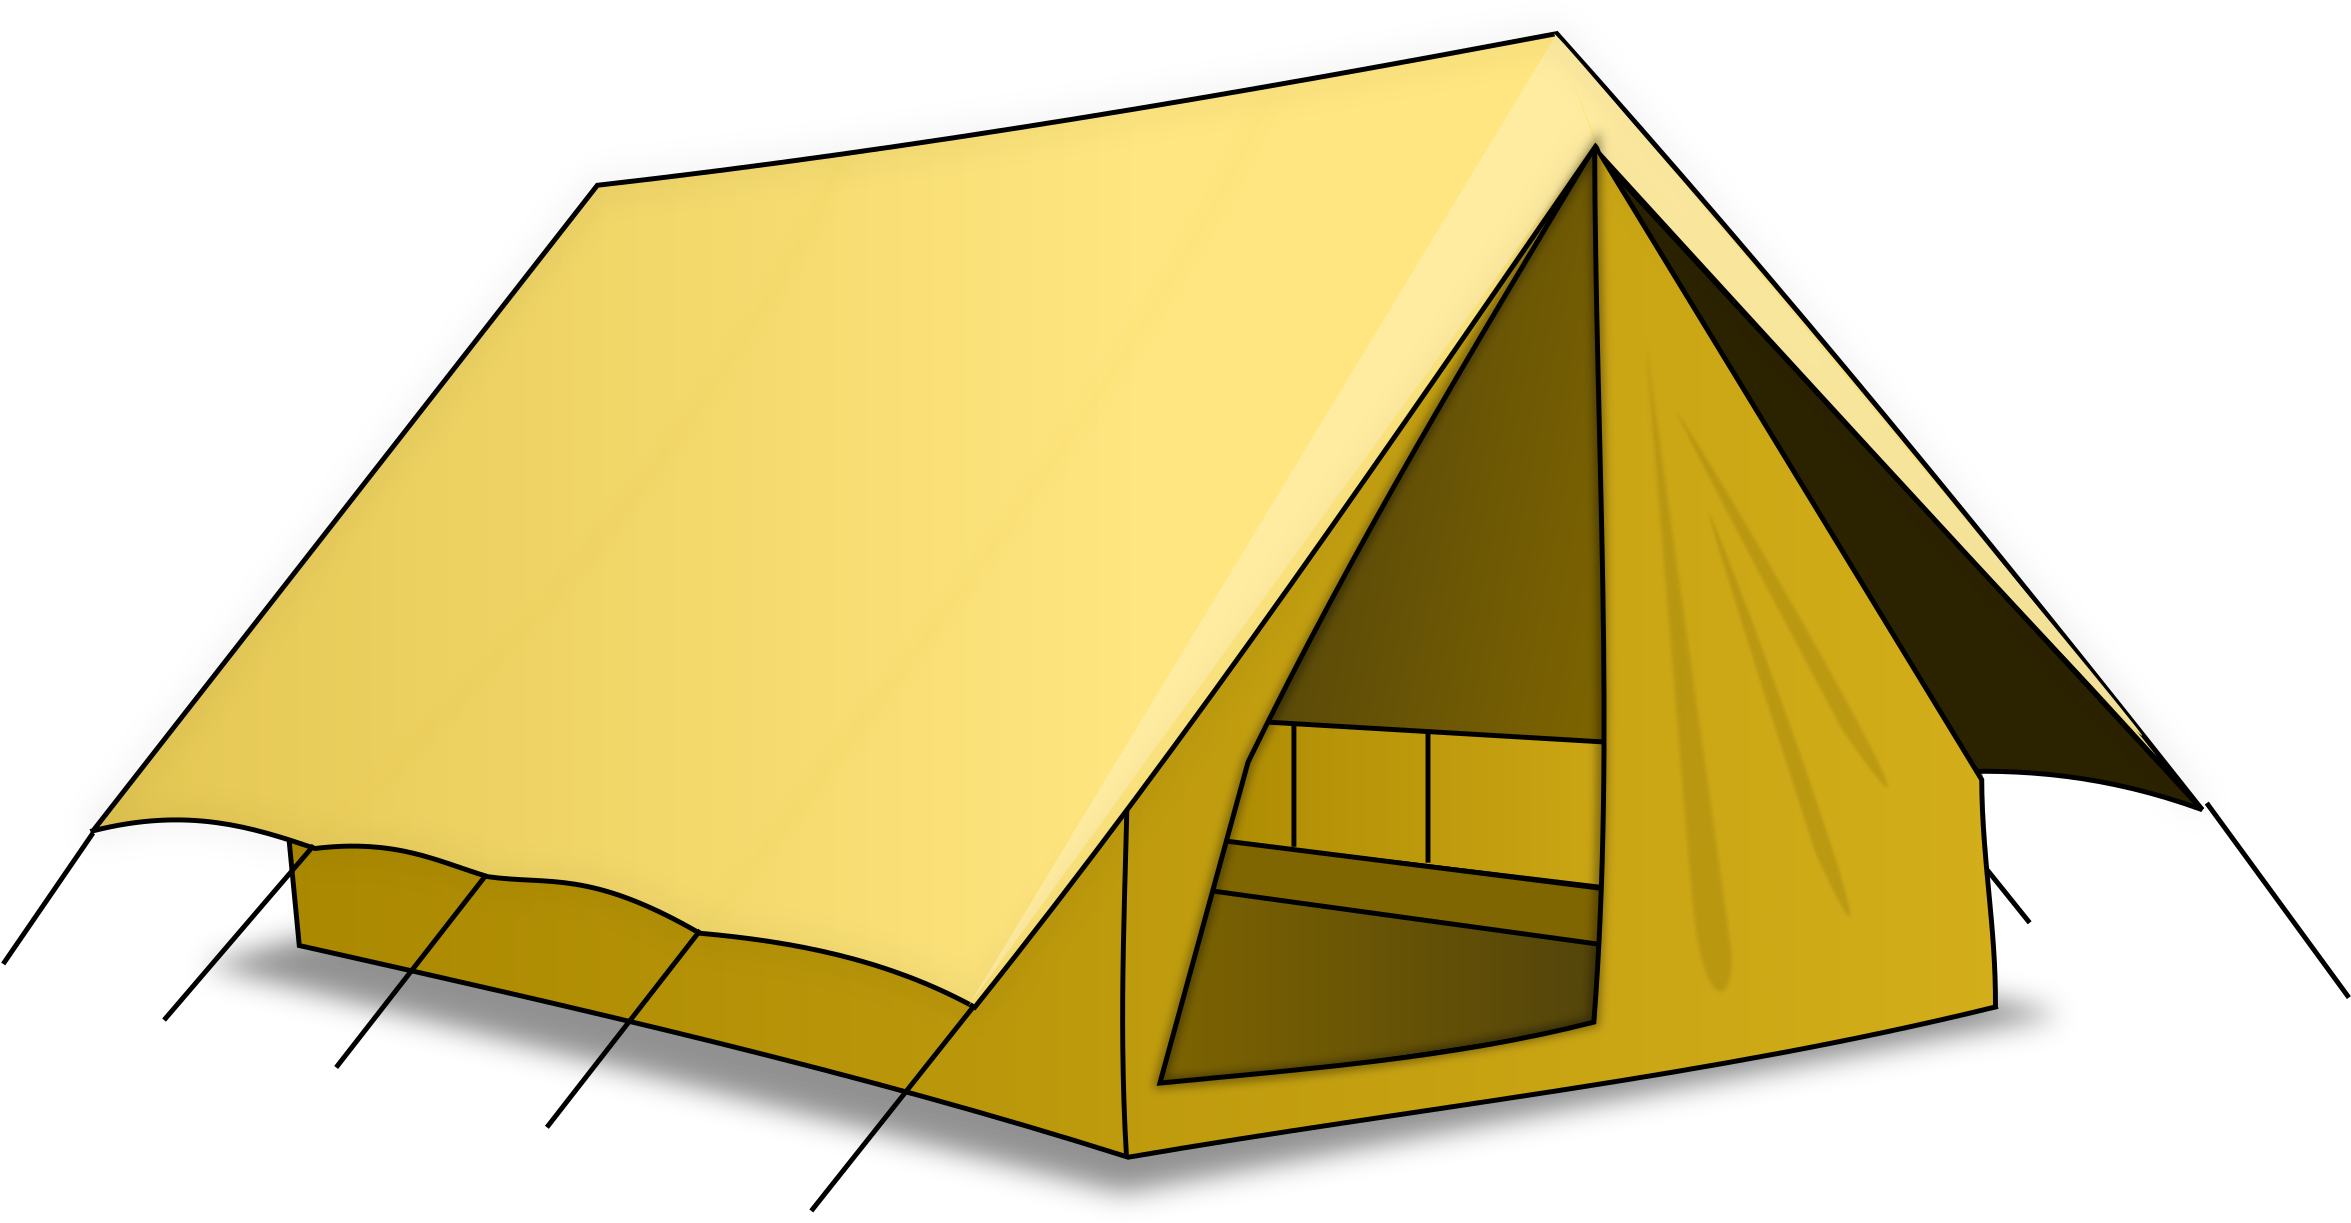 This Free Clip Arts Design Of Tente Vector Home - Camping Tent Shower Curtain (2400x1283)